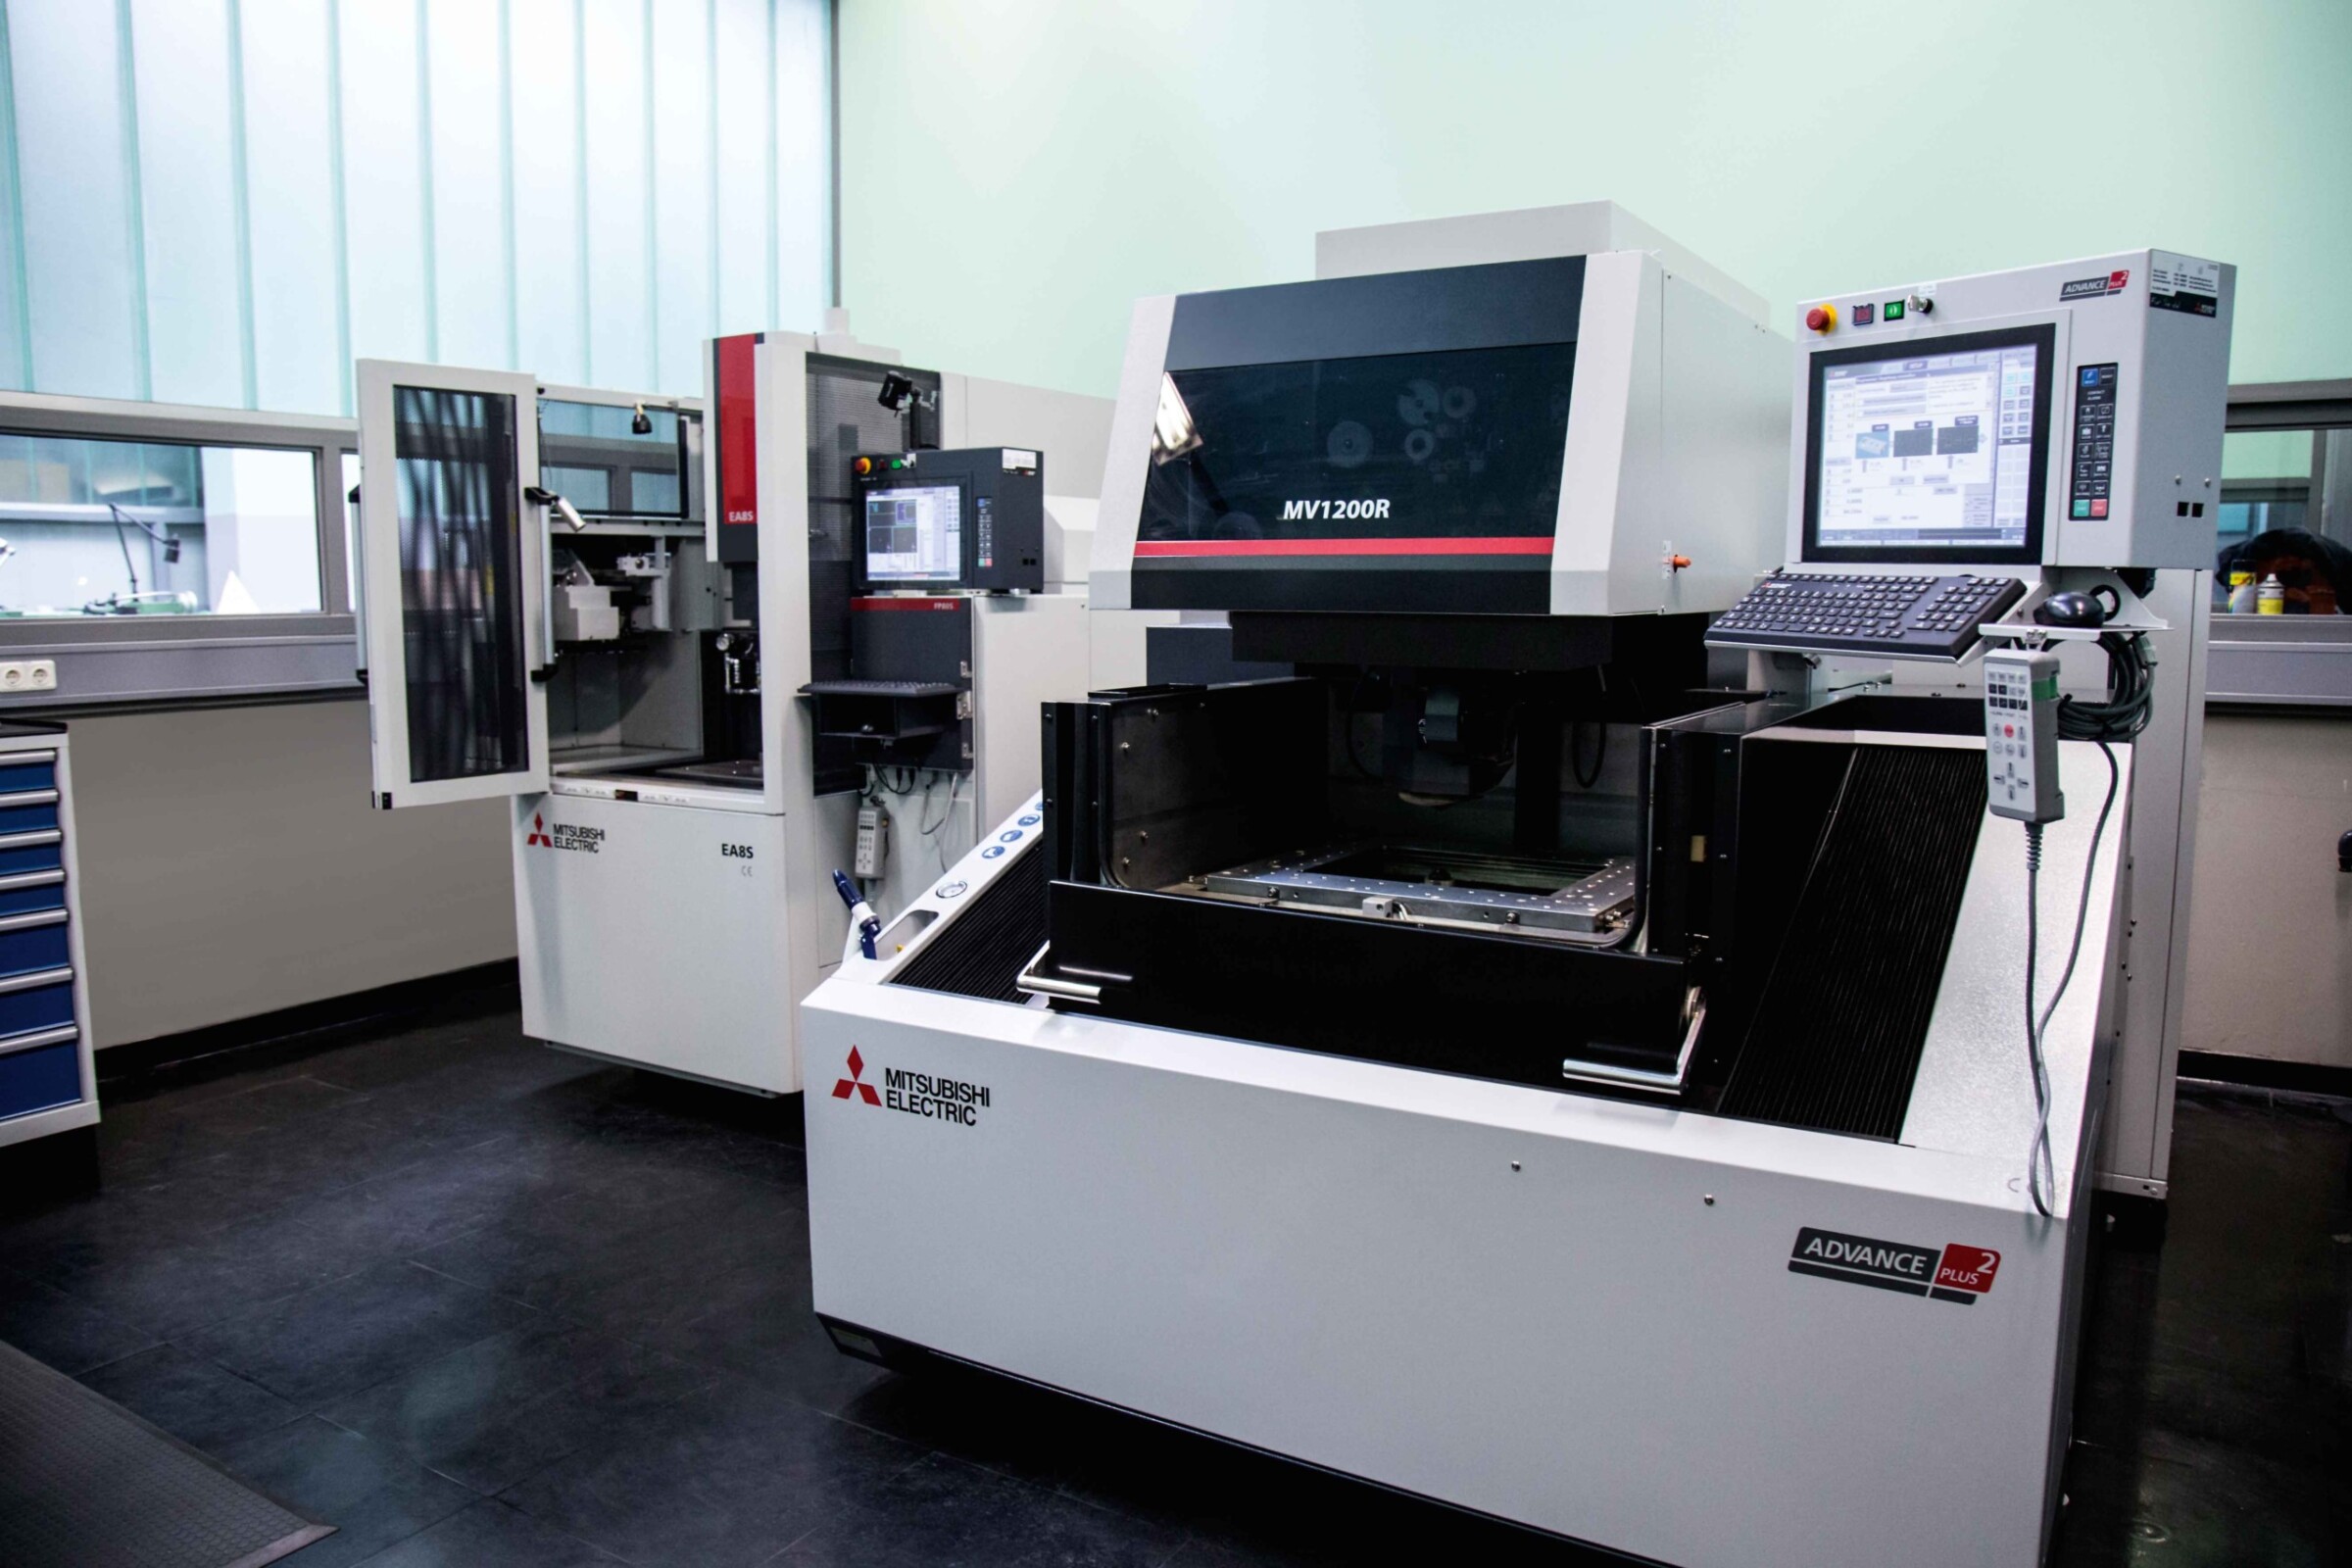 By investing in the EA8S die-sinking machine and the MV1200R wire-cutting machine from Mitsubishi Electric, WIFI in Linz is excellently equipped for the sound basic and advanced training of skilled staff in industry.